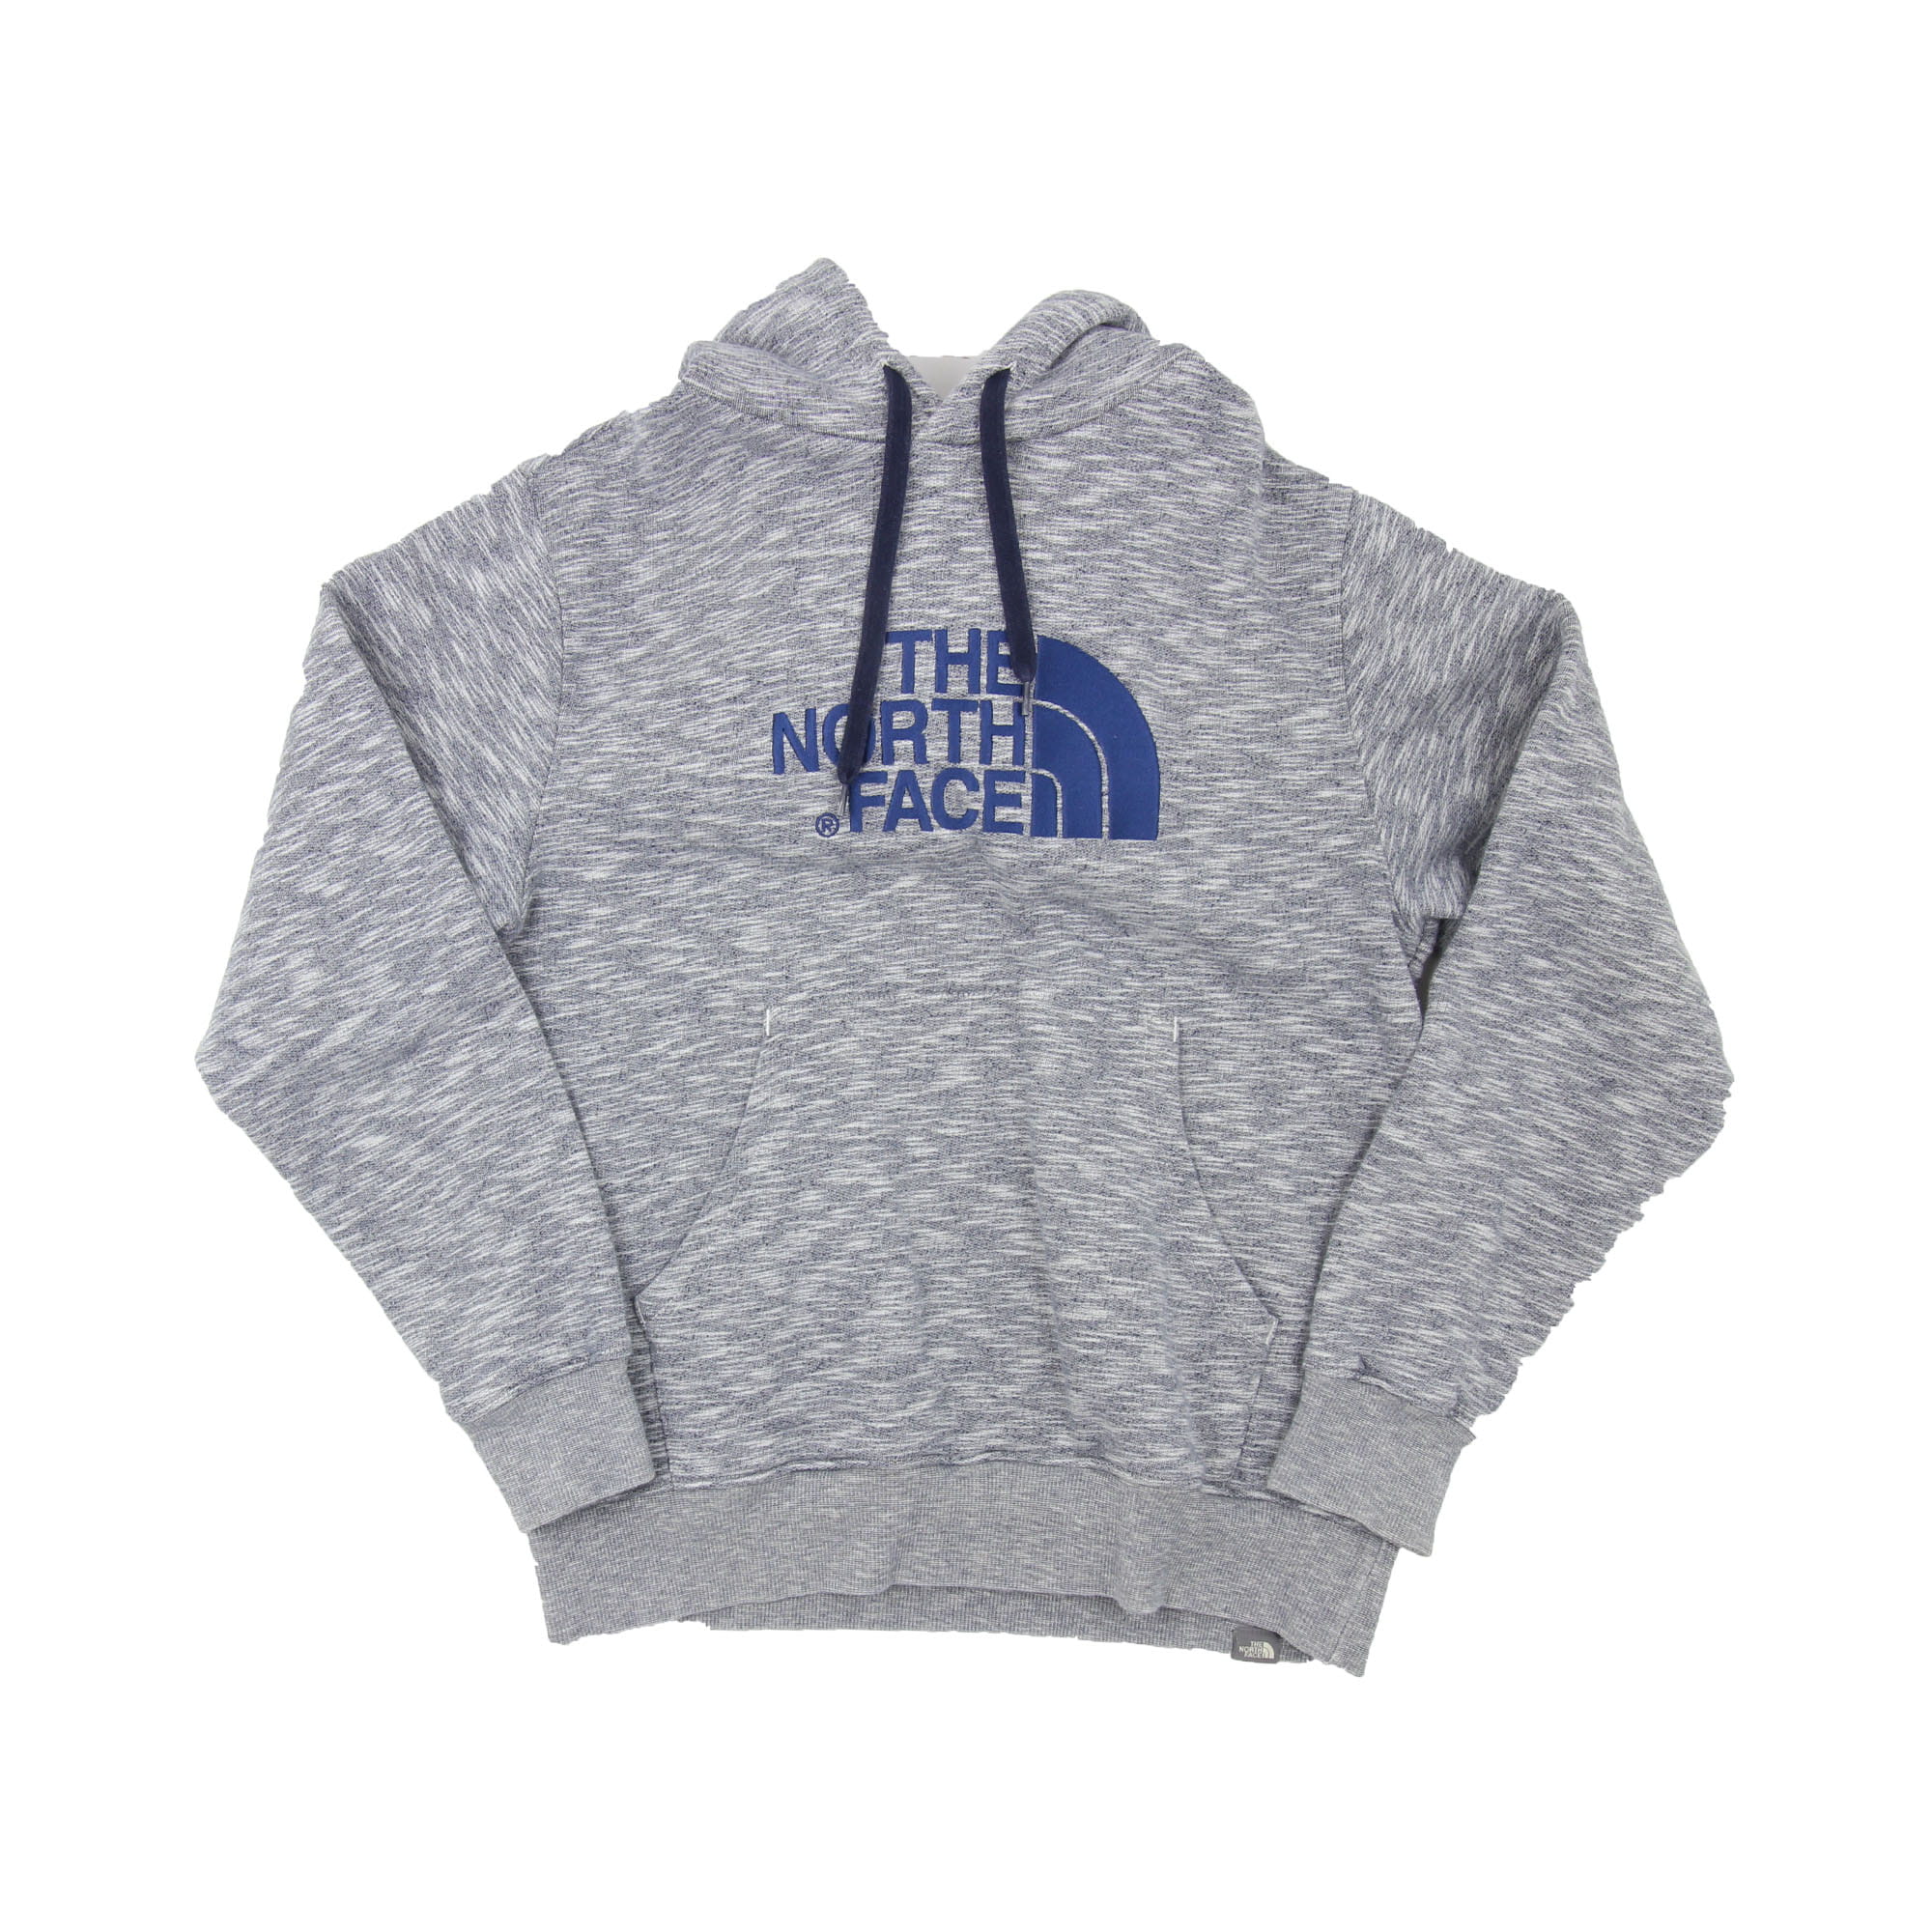 The North Face Embroidered Logo Sweatshirt -  M/L